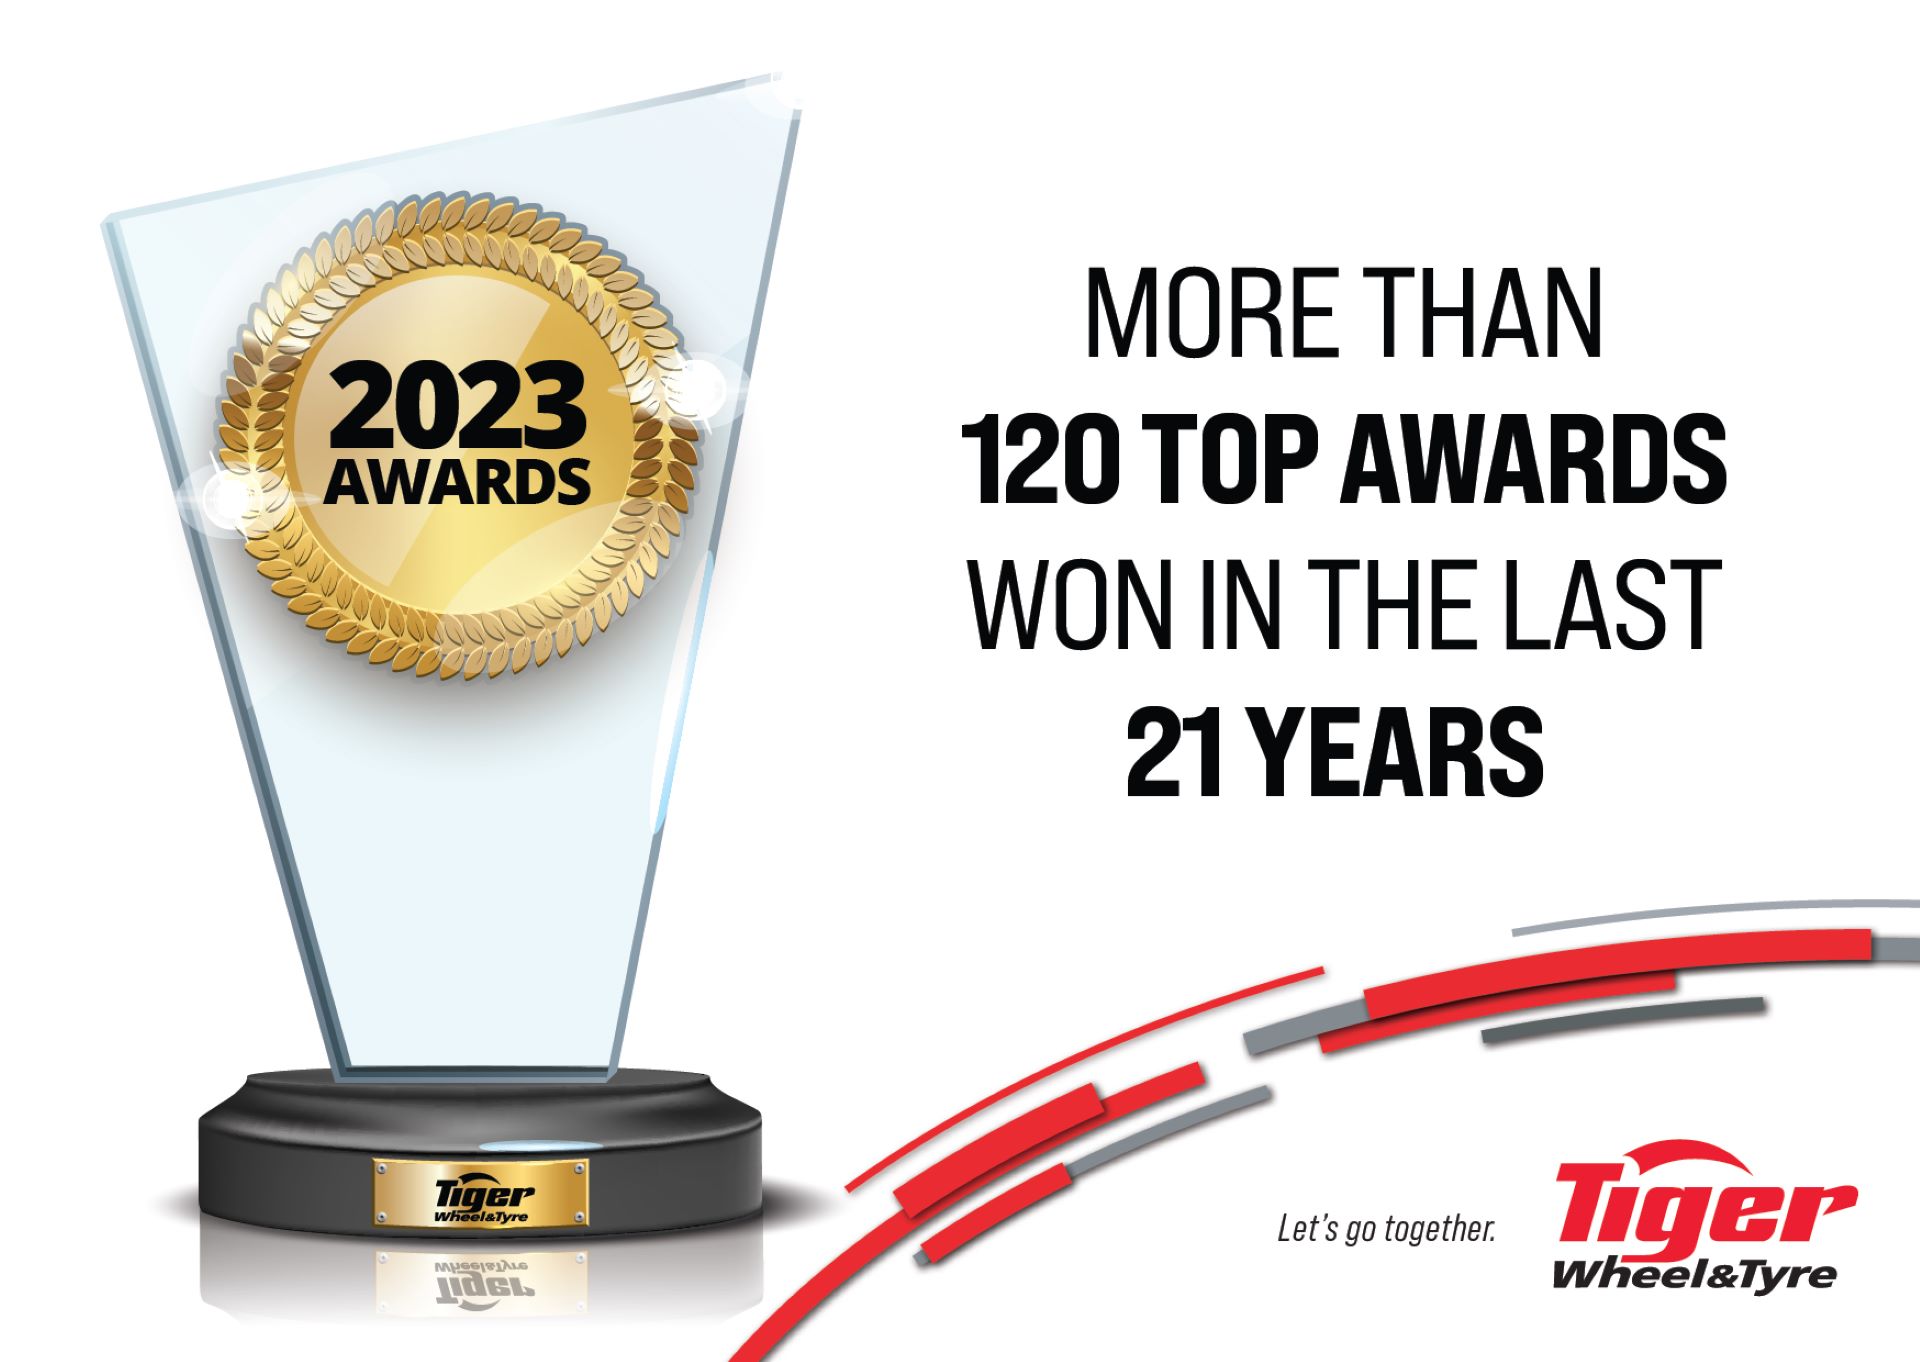 South Africans Vote Tiger Wheel & Tyre Tops in 11 Different Awards this Year